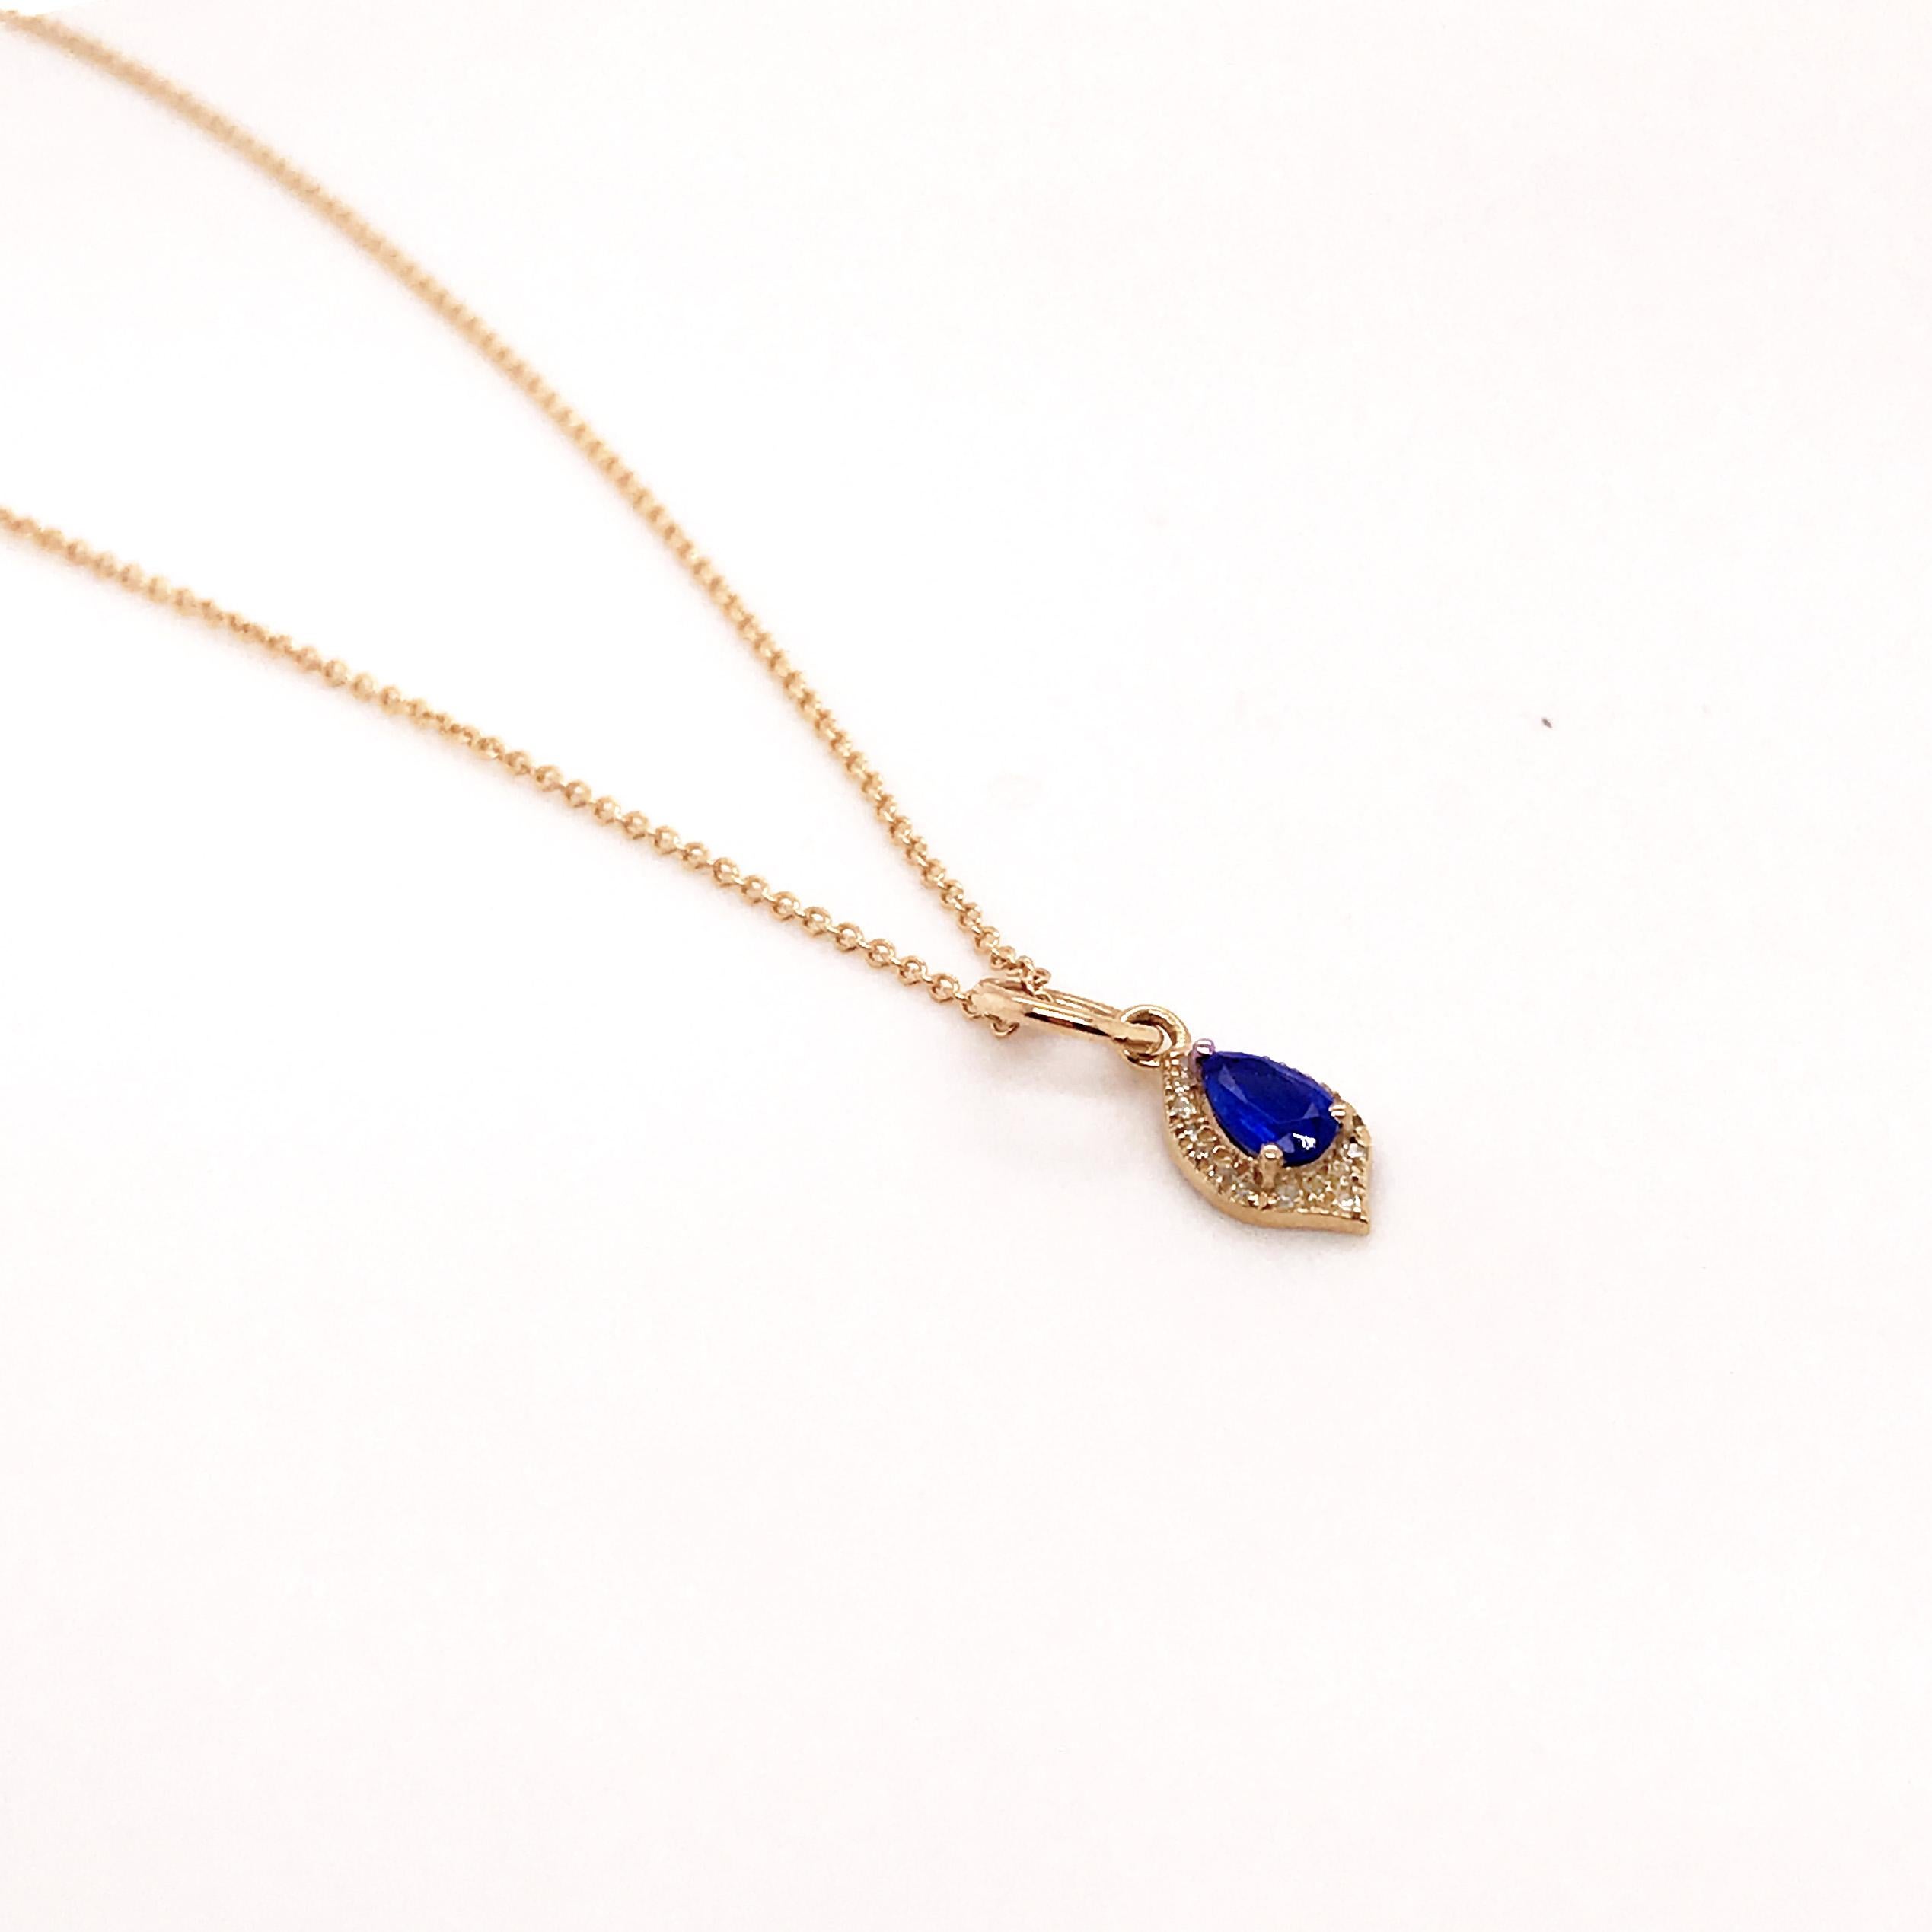 This minimalist pendant has a fantastic pear shaped sapphire with a halo of diamonds around it. all set in 14 karat yellow gold.  The 14k gold looks amazing with the contrast of the blue sapphire.  The diamonds and sapphire are excellent quality